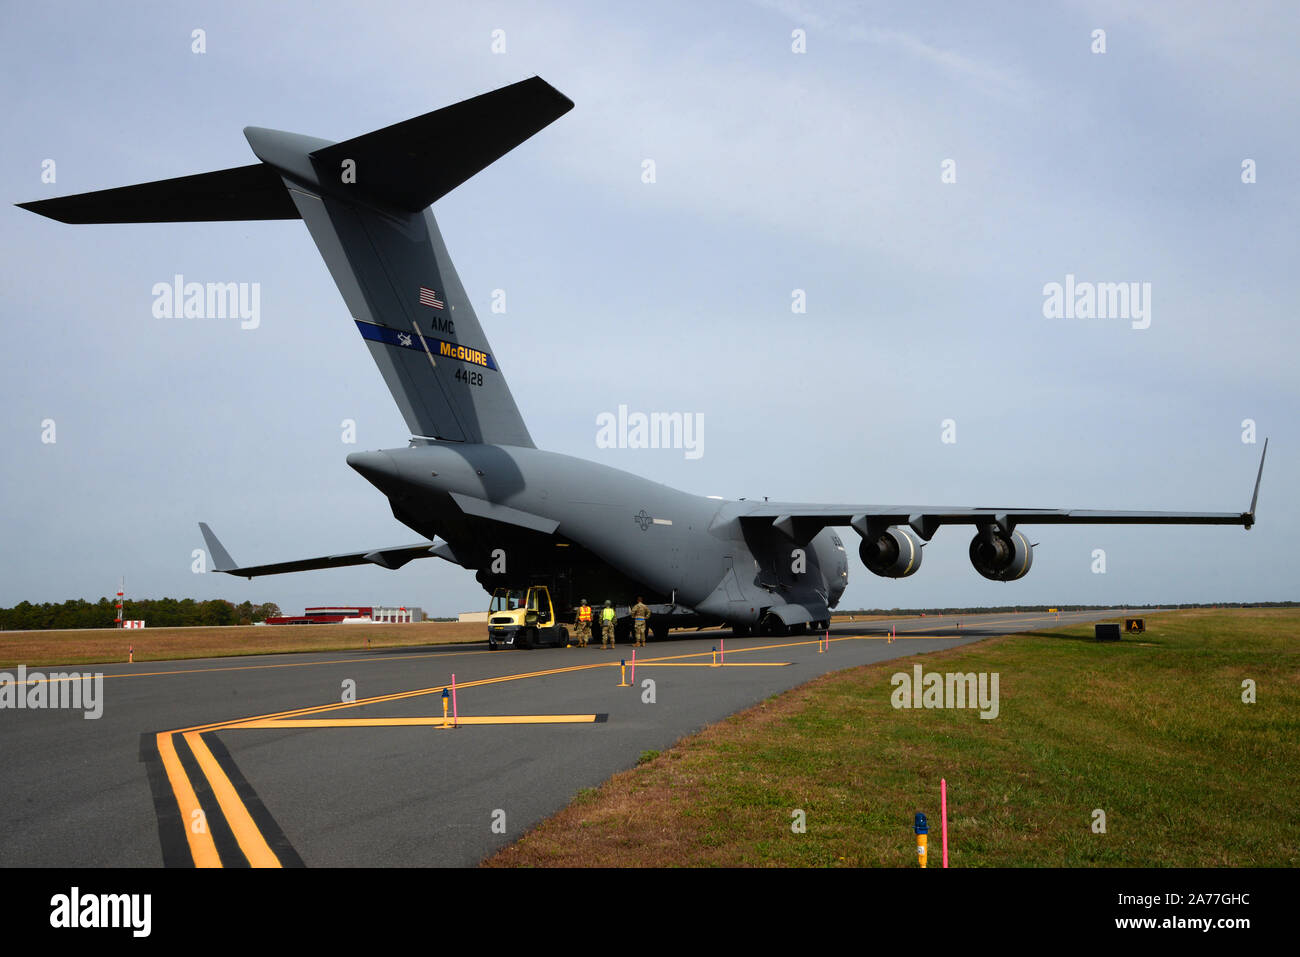 U.S. Air Force C-17 Globemaster III, from the 6th Airlift Squadron out of Joint Base McGuire-Dix-Lakehurst, opens its cargo door after landing at the Atlantic City Air National Guard Base, New Jersey, during a training exercise October 25, 2019. Exercise Operation Jersey Shield is designed to evaluate and ensure mission readiness of the 177th Fighter Wing in support of worldwide deployment. (U.S. Air National Guard photo by Senior Master Sgt. Andrew J. Moseley) Stock Photo